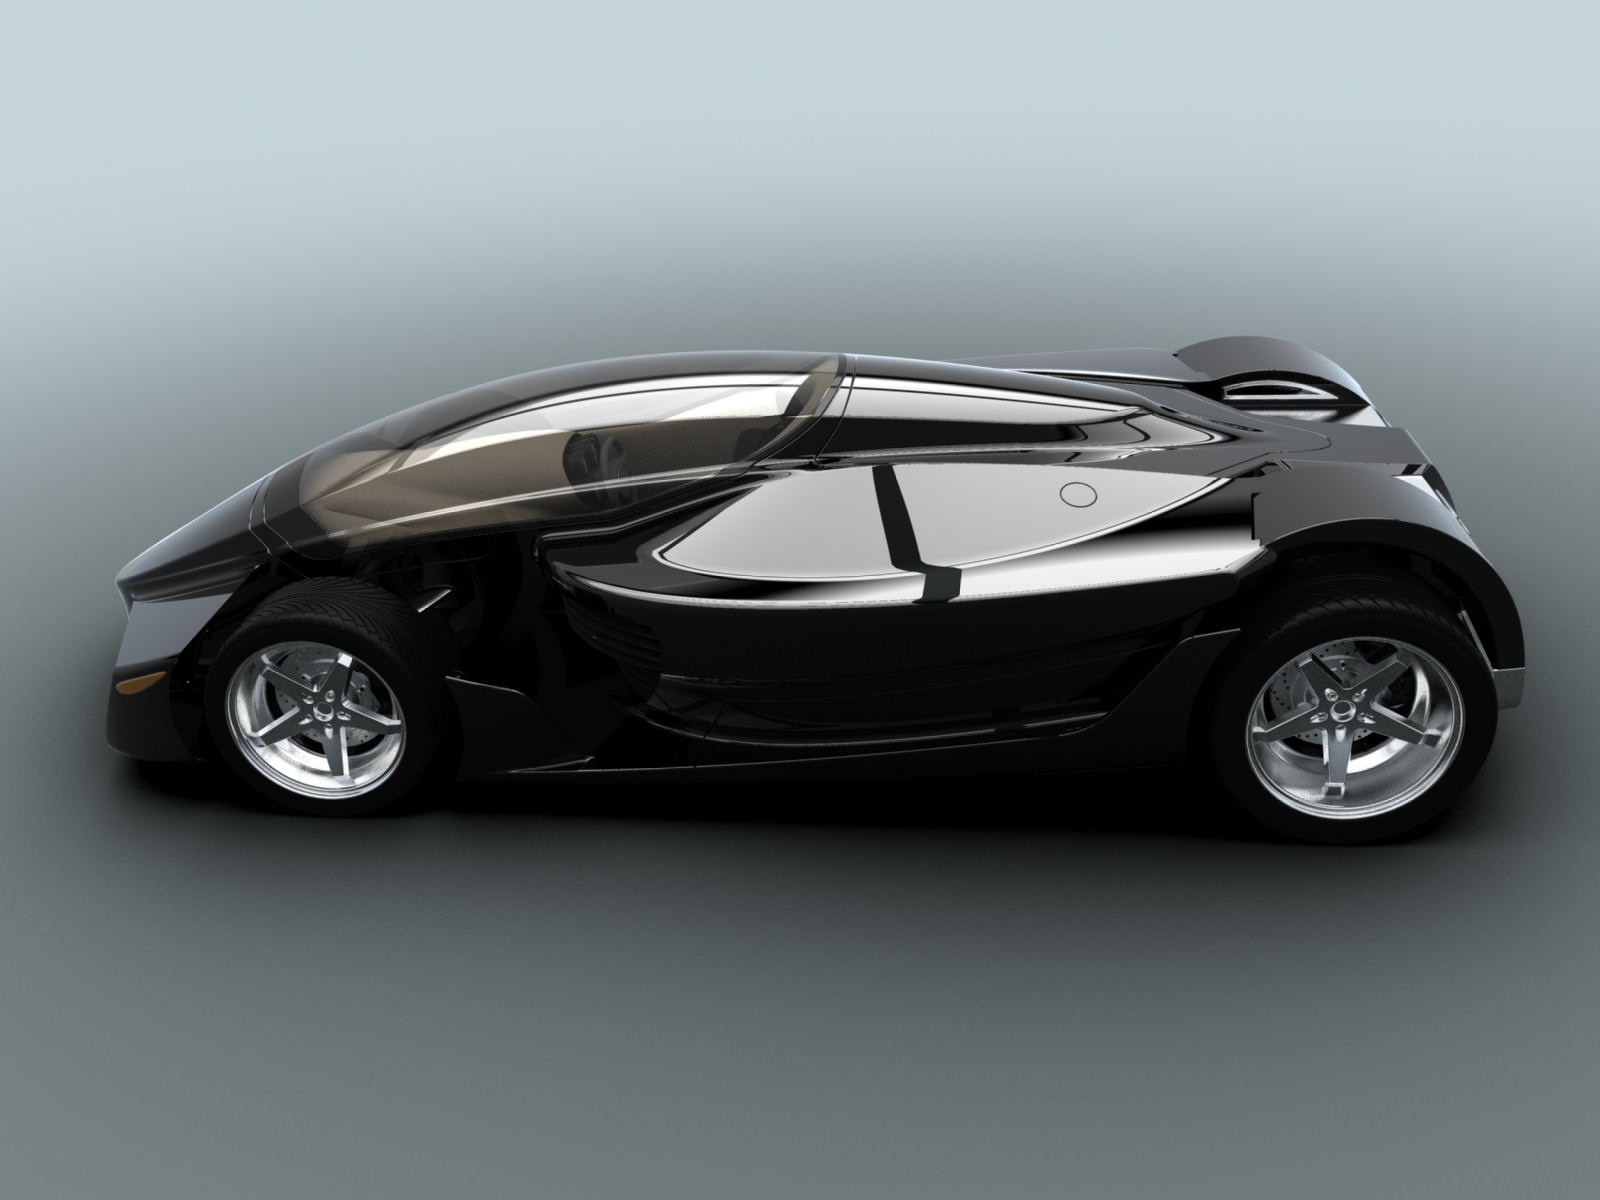 75 Concept Cars Of The Future Incredible Design - Designsmag